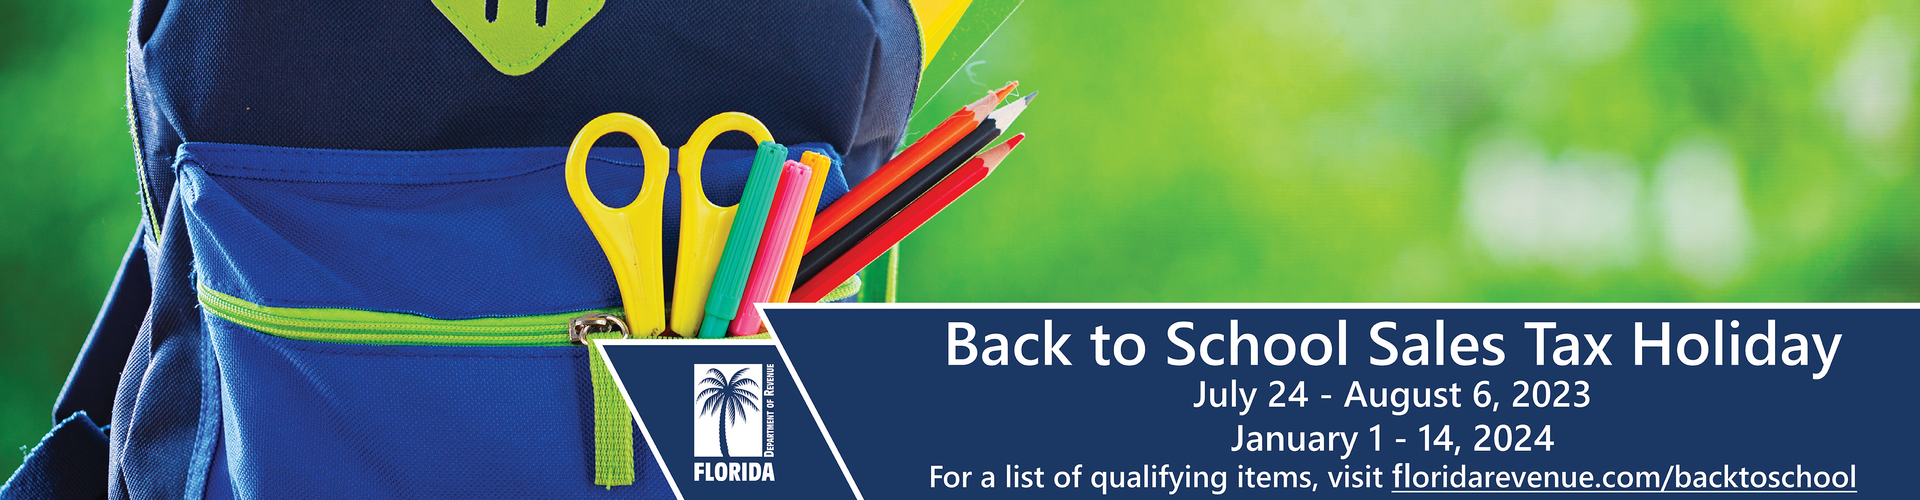 Back To School Sales Tax Holiday in FL